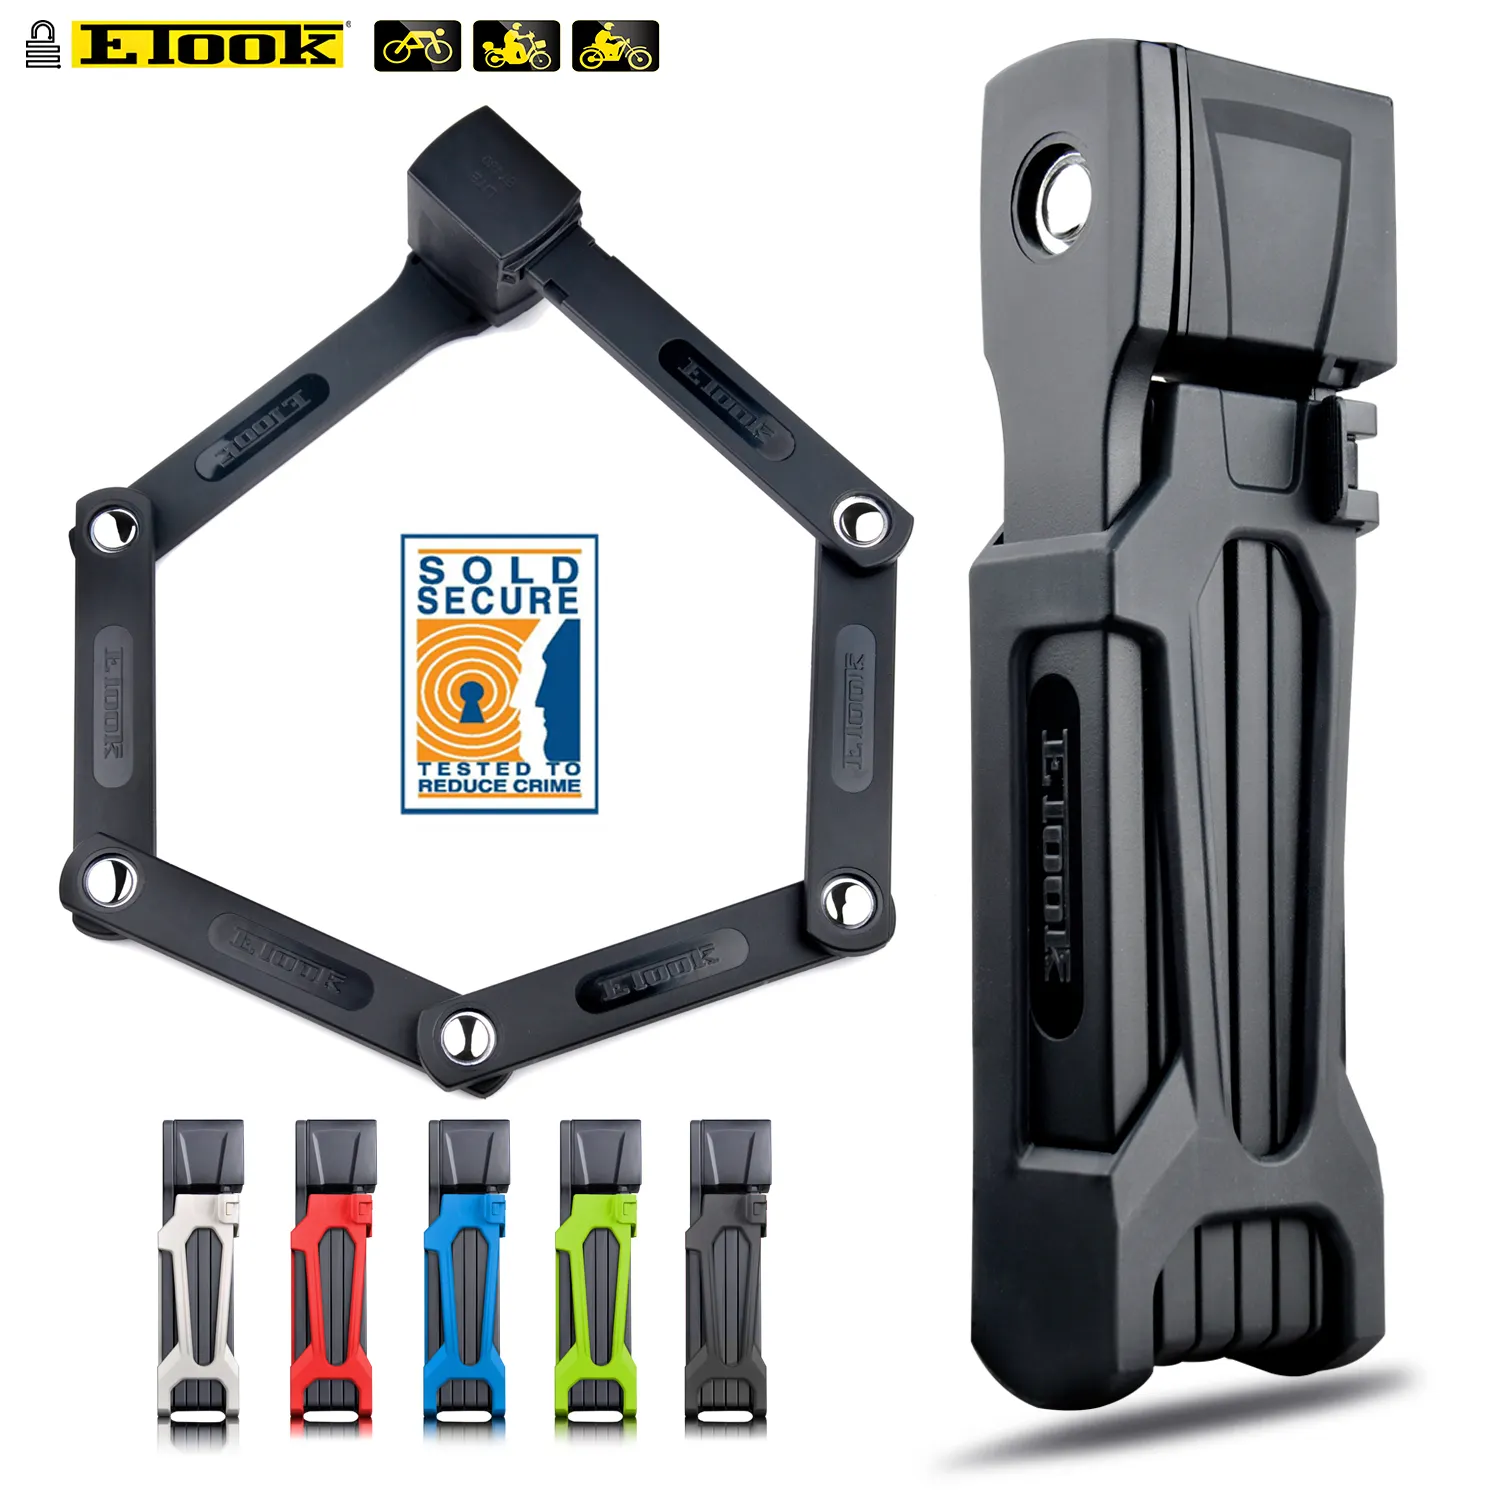 ETOOK Exquisite Portable Stainless Steel Motorcycle Foldable Bicycle Lock Security Lock